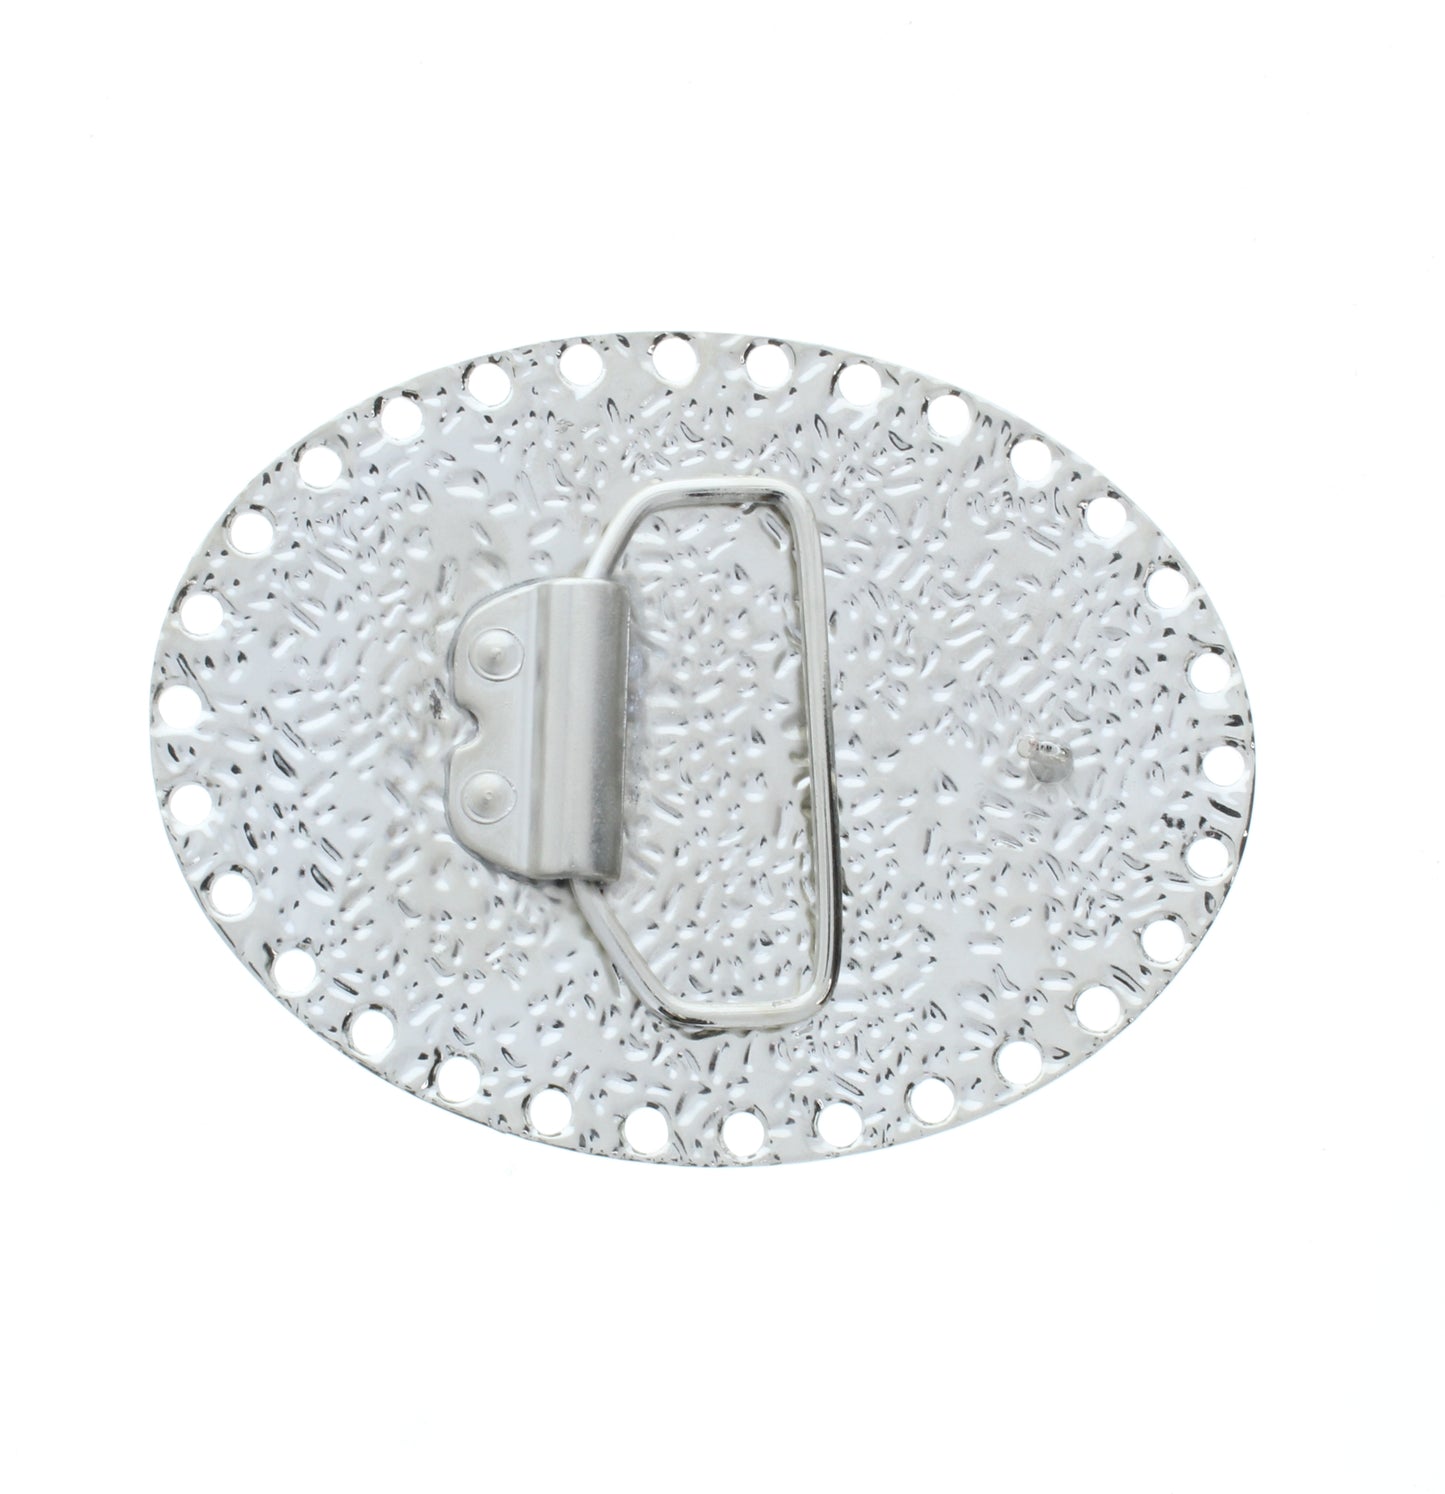 Oval Belt Buckle Base w/Hole-Puncture Border, each